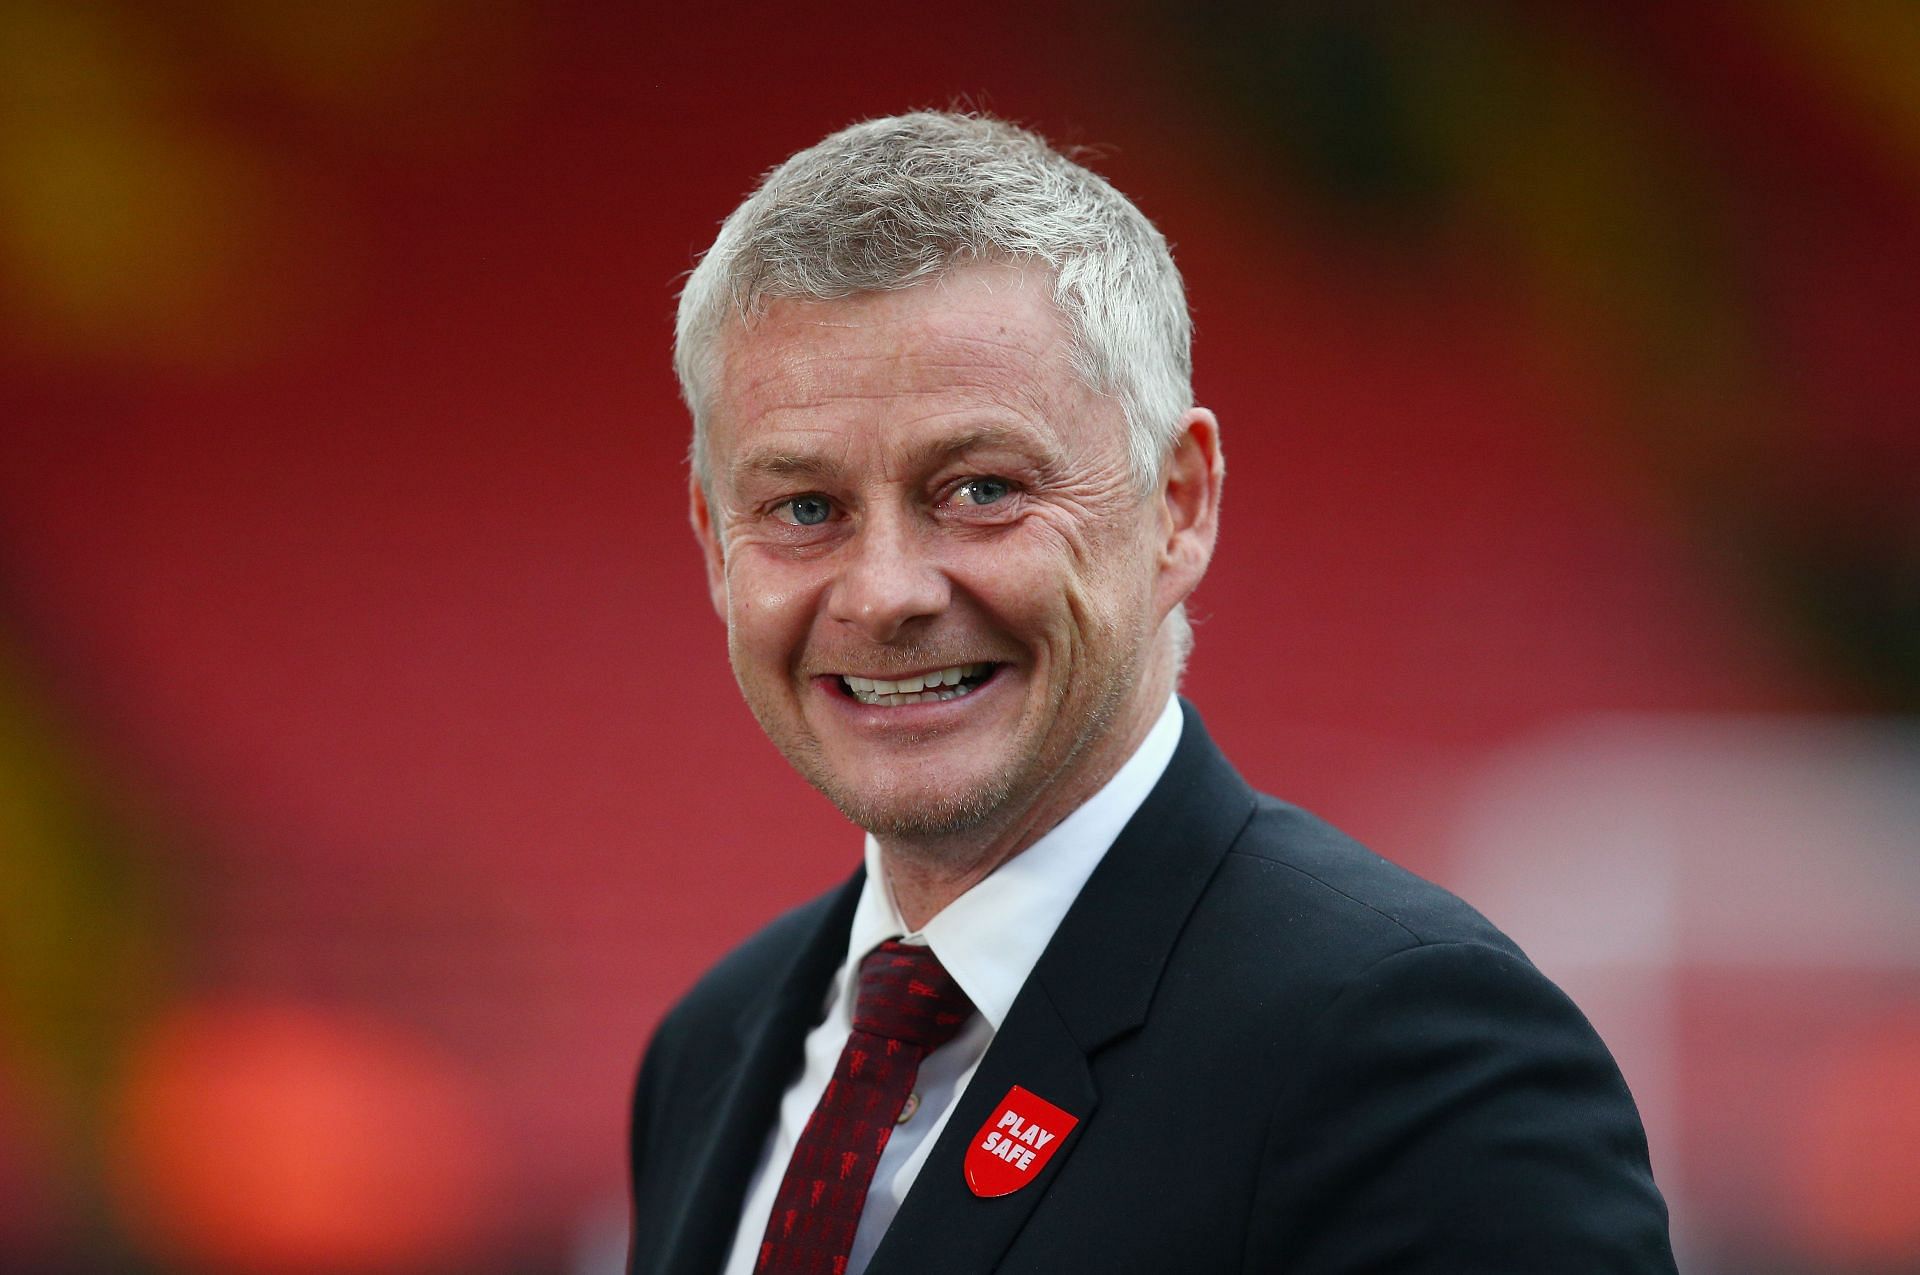 Who will succeed Ole Gunnar Solskjaer as Manchester United manager?